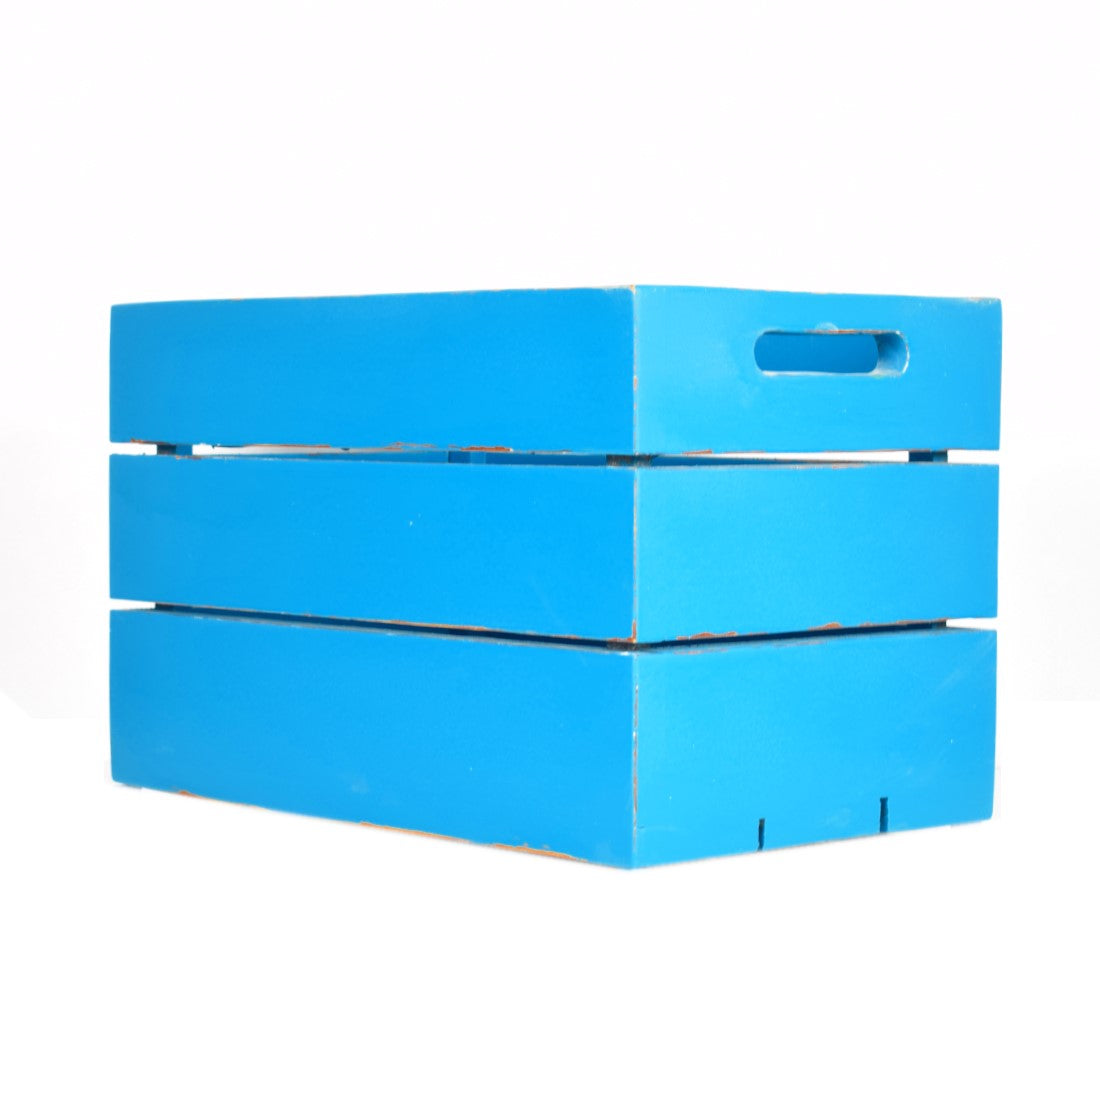 CustHum-Crate-multipurpose pallet crate box (teal, upright view)